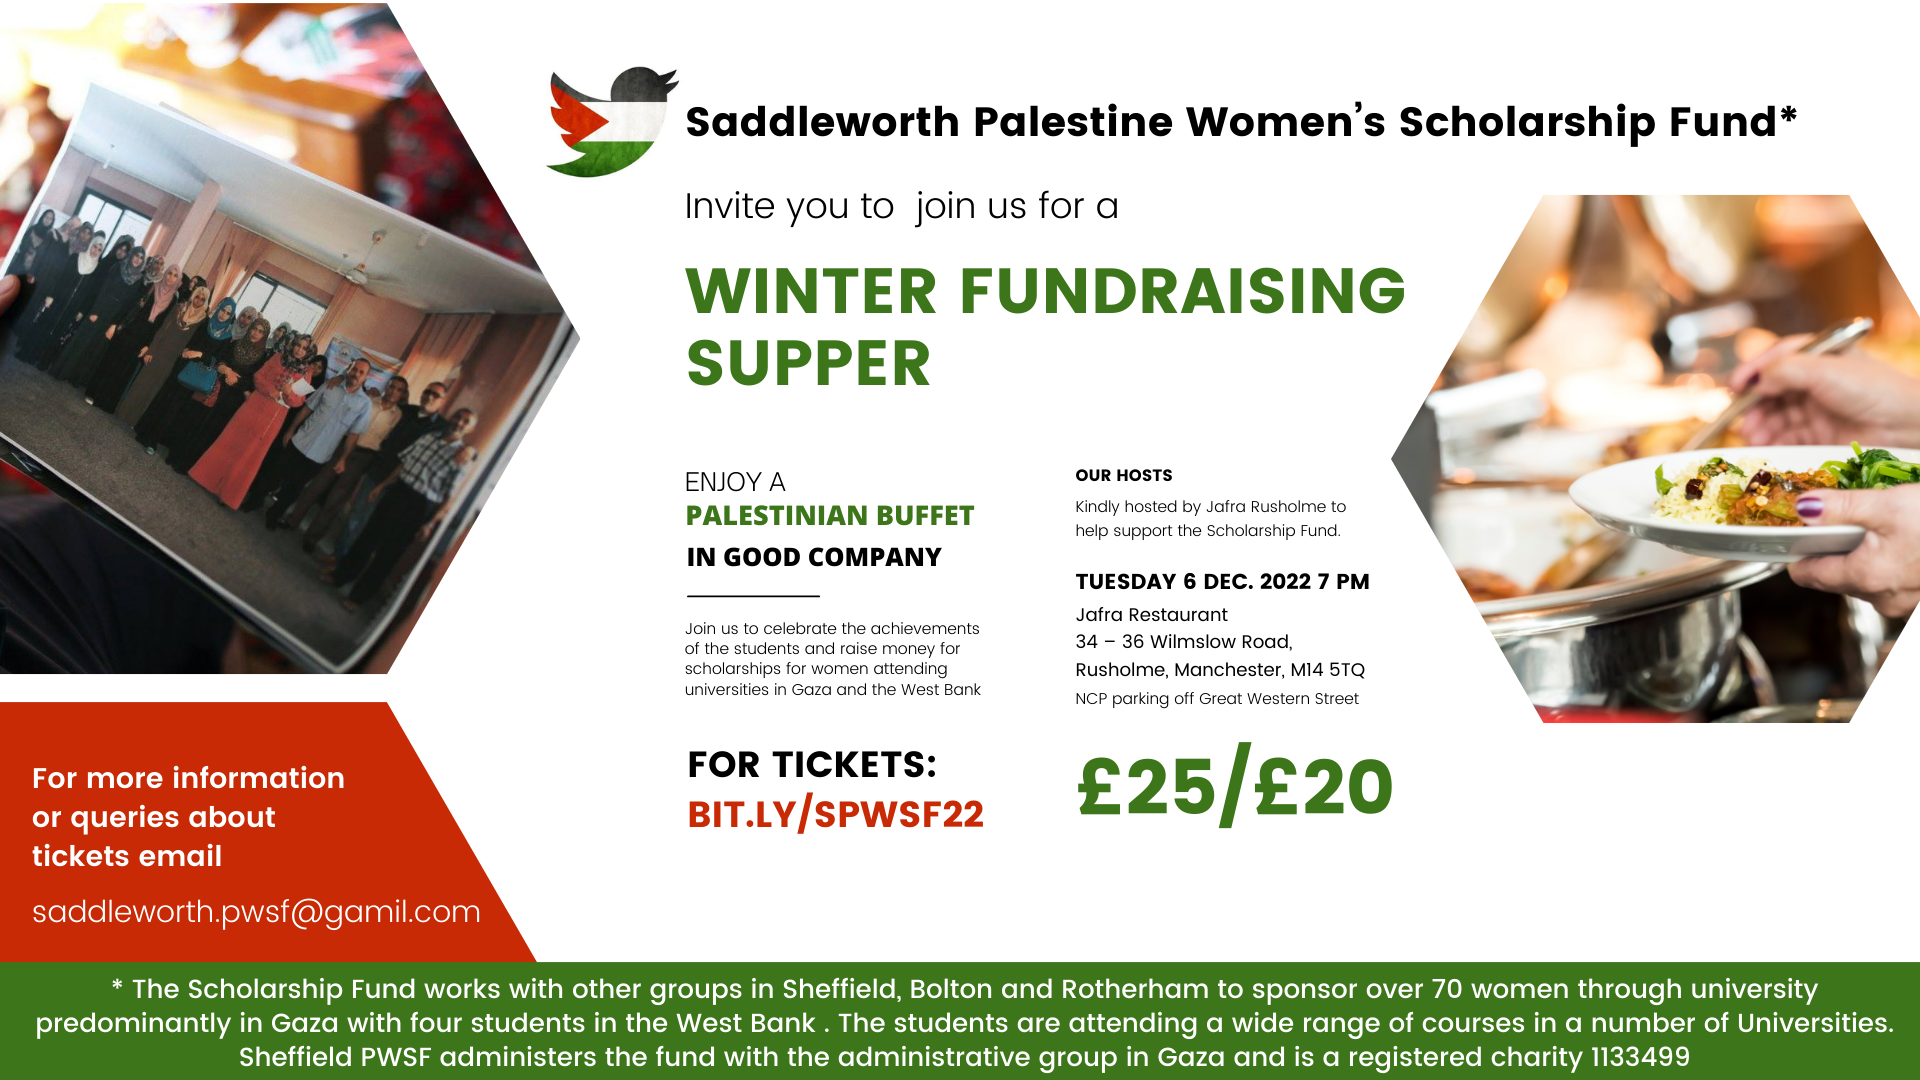 Winter Fundraising Supper - Enjoy a Palestinian Buffet  in Good Company